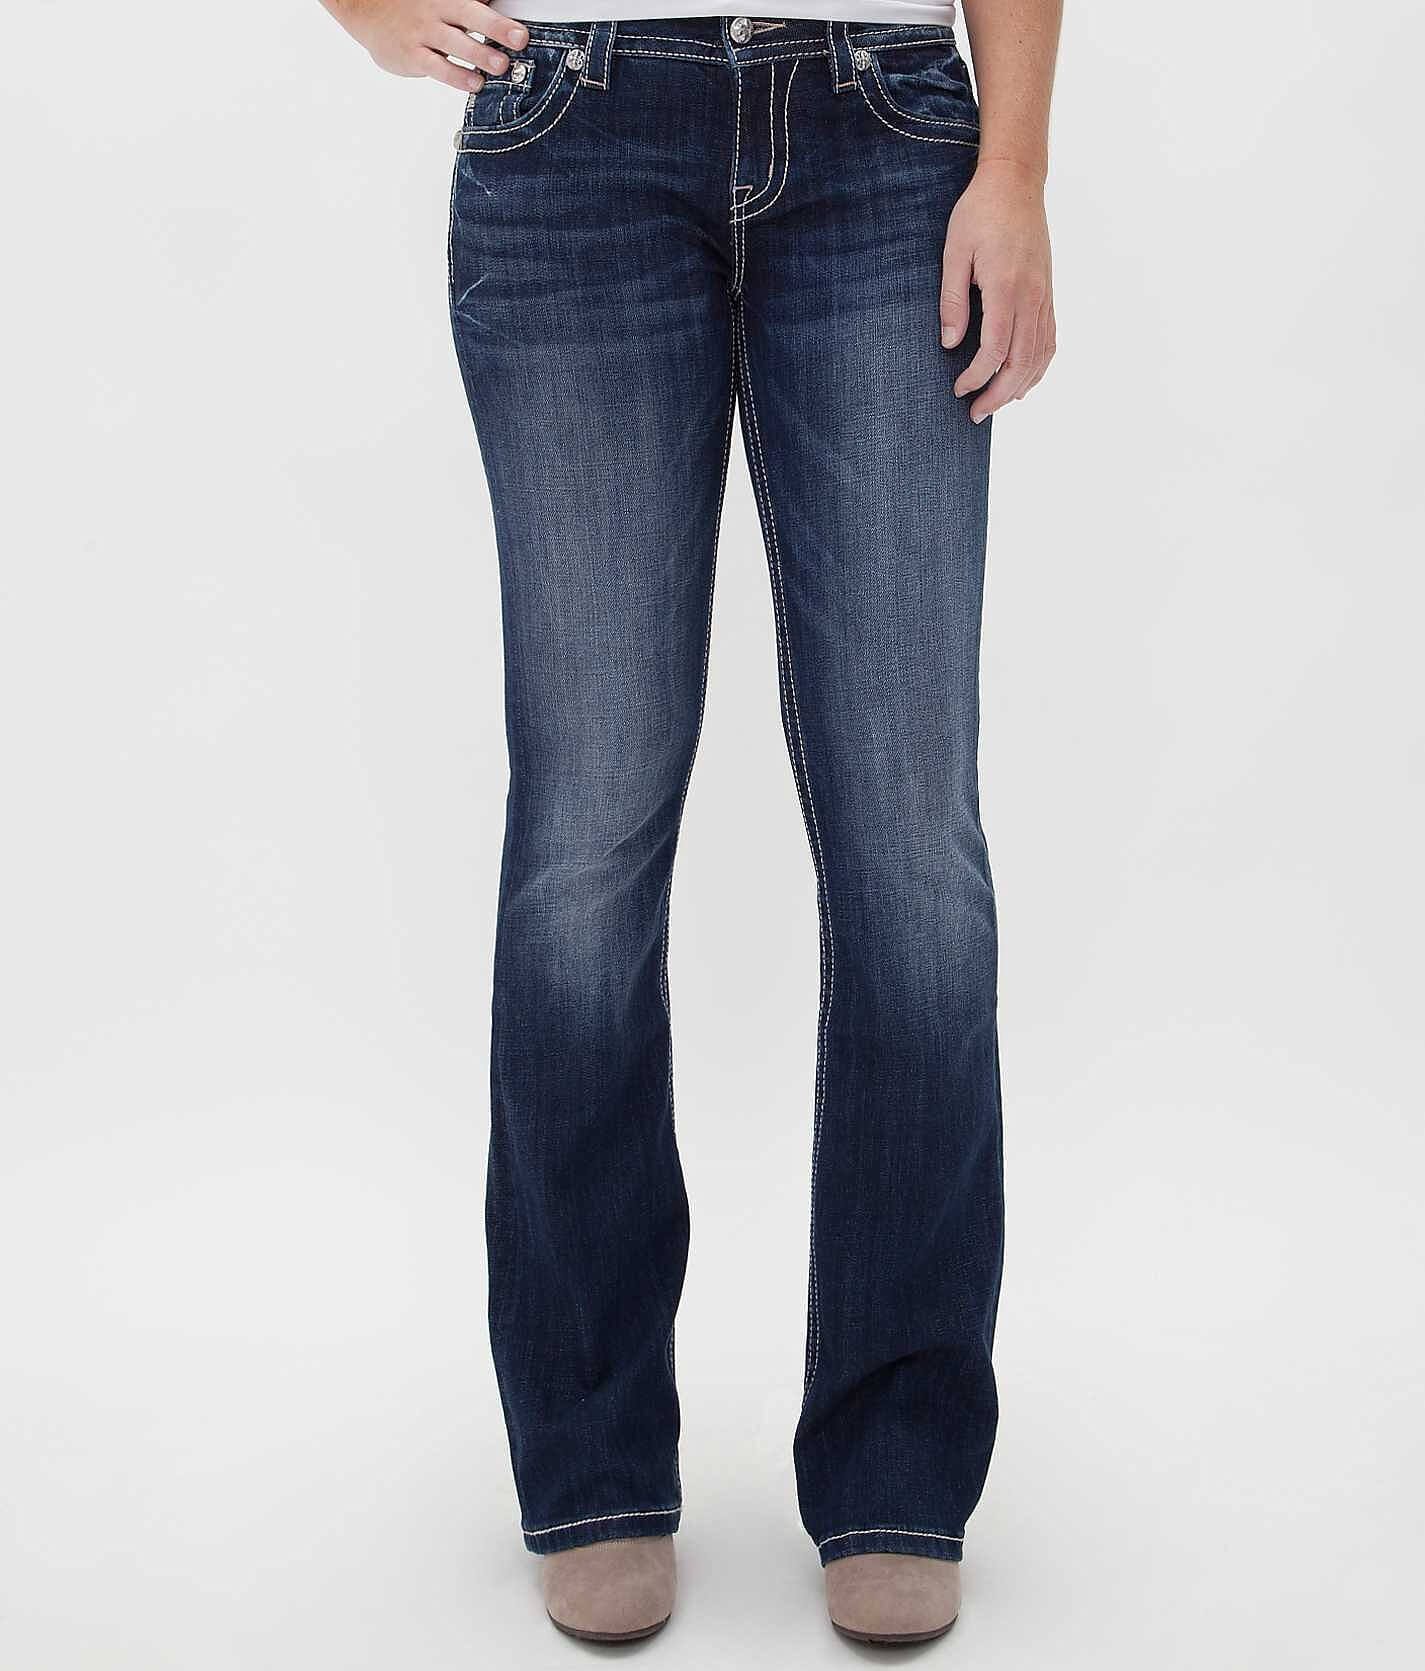 women's jeans relaxed through hip and thigh